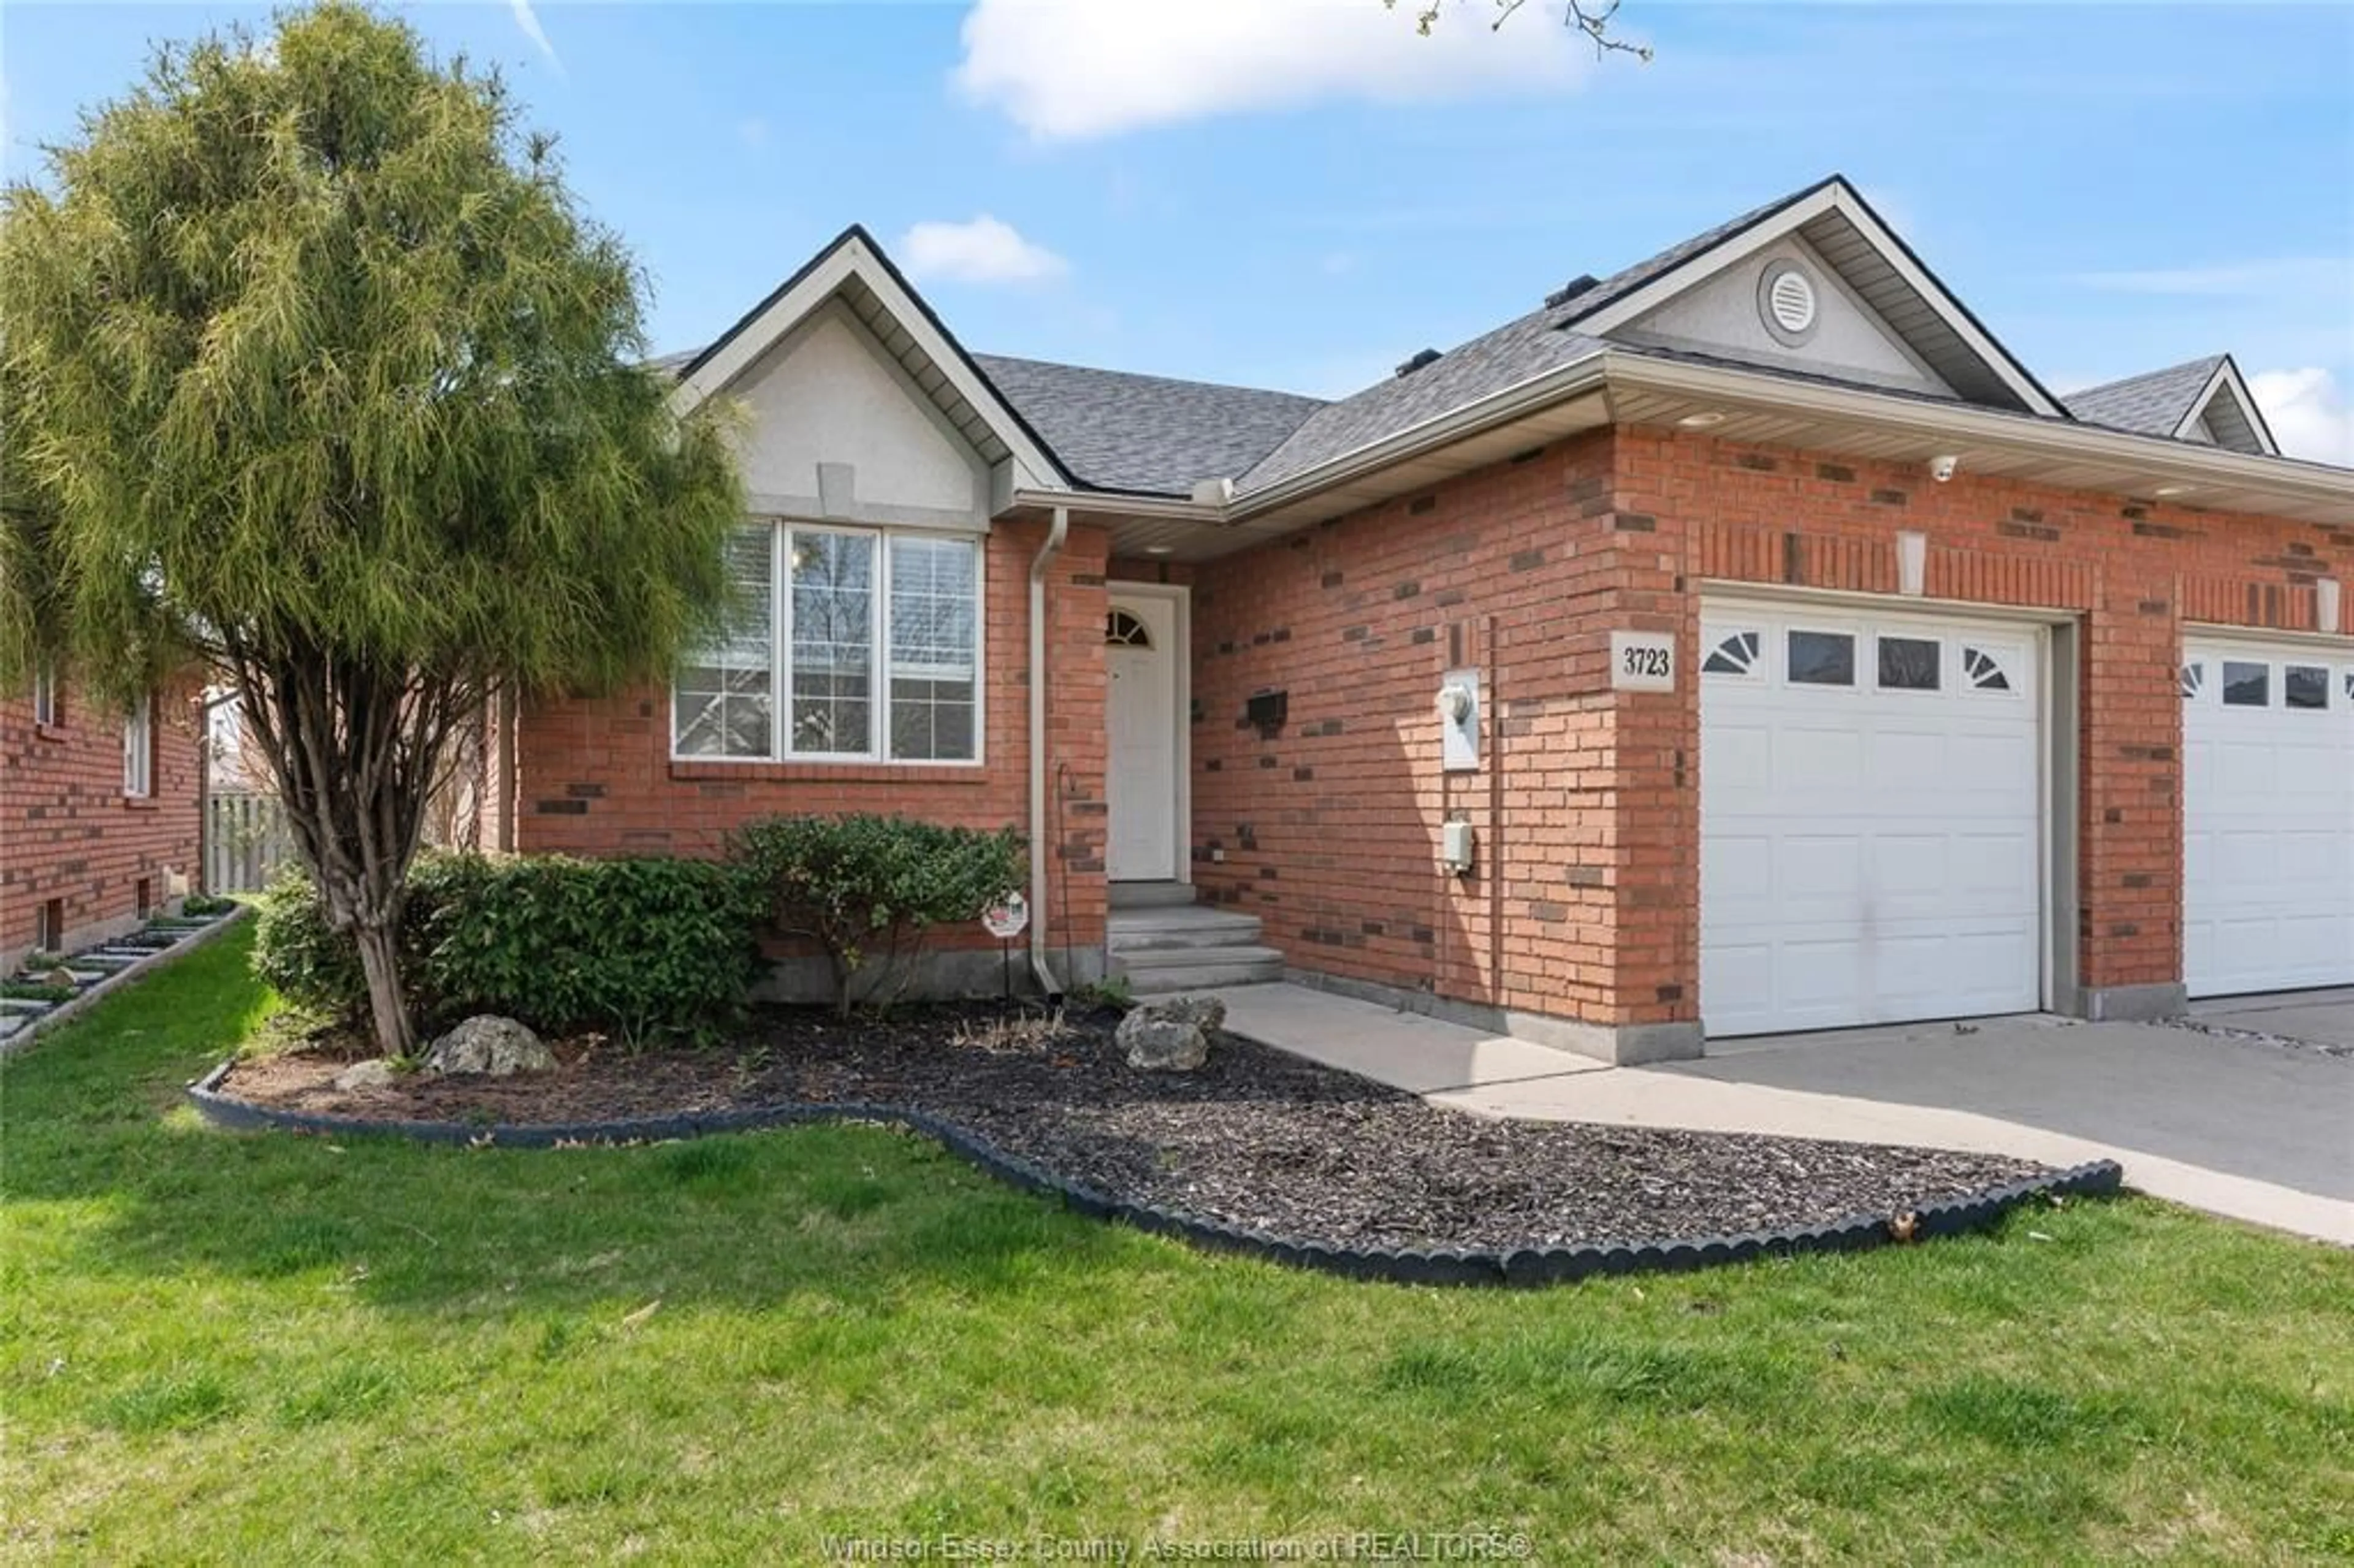 Home with brick exterior material for 3723 PRAIRIE Crt, Windsor Ontario N9G 2X4